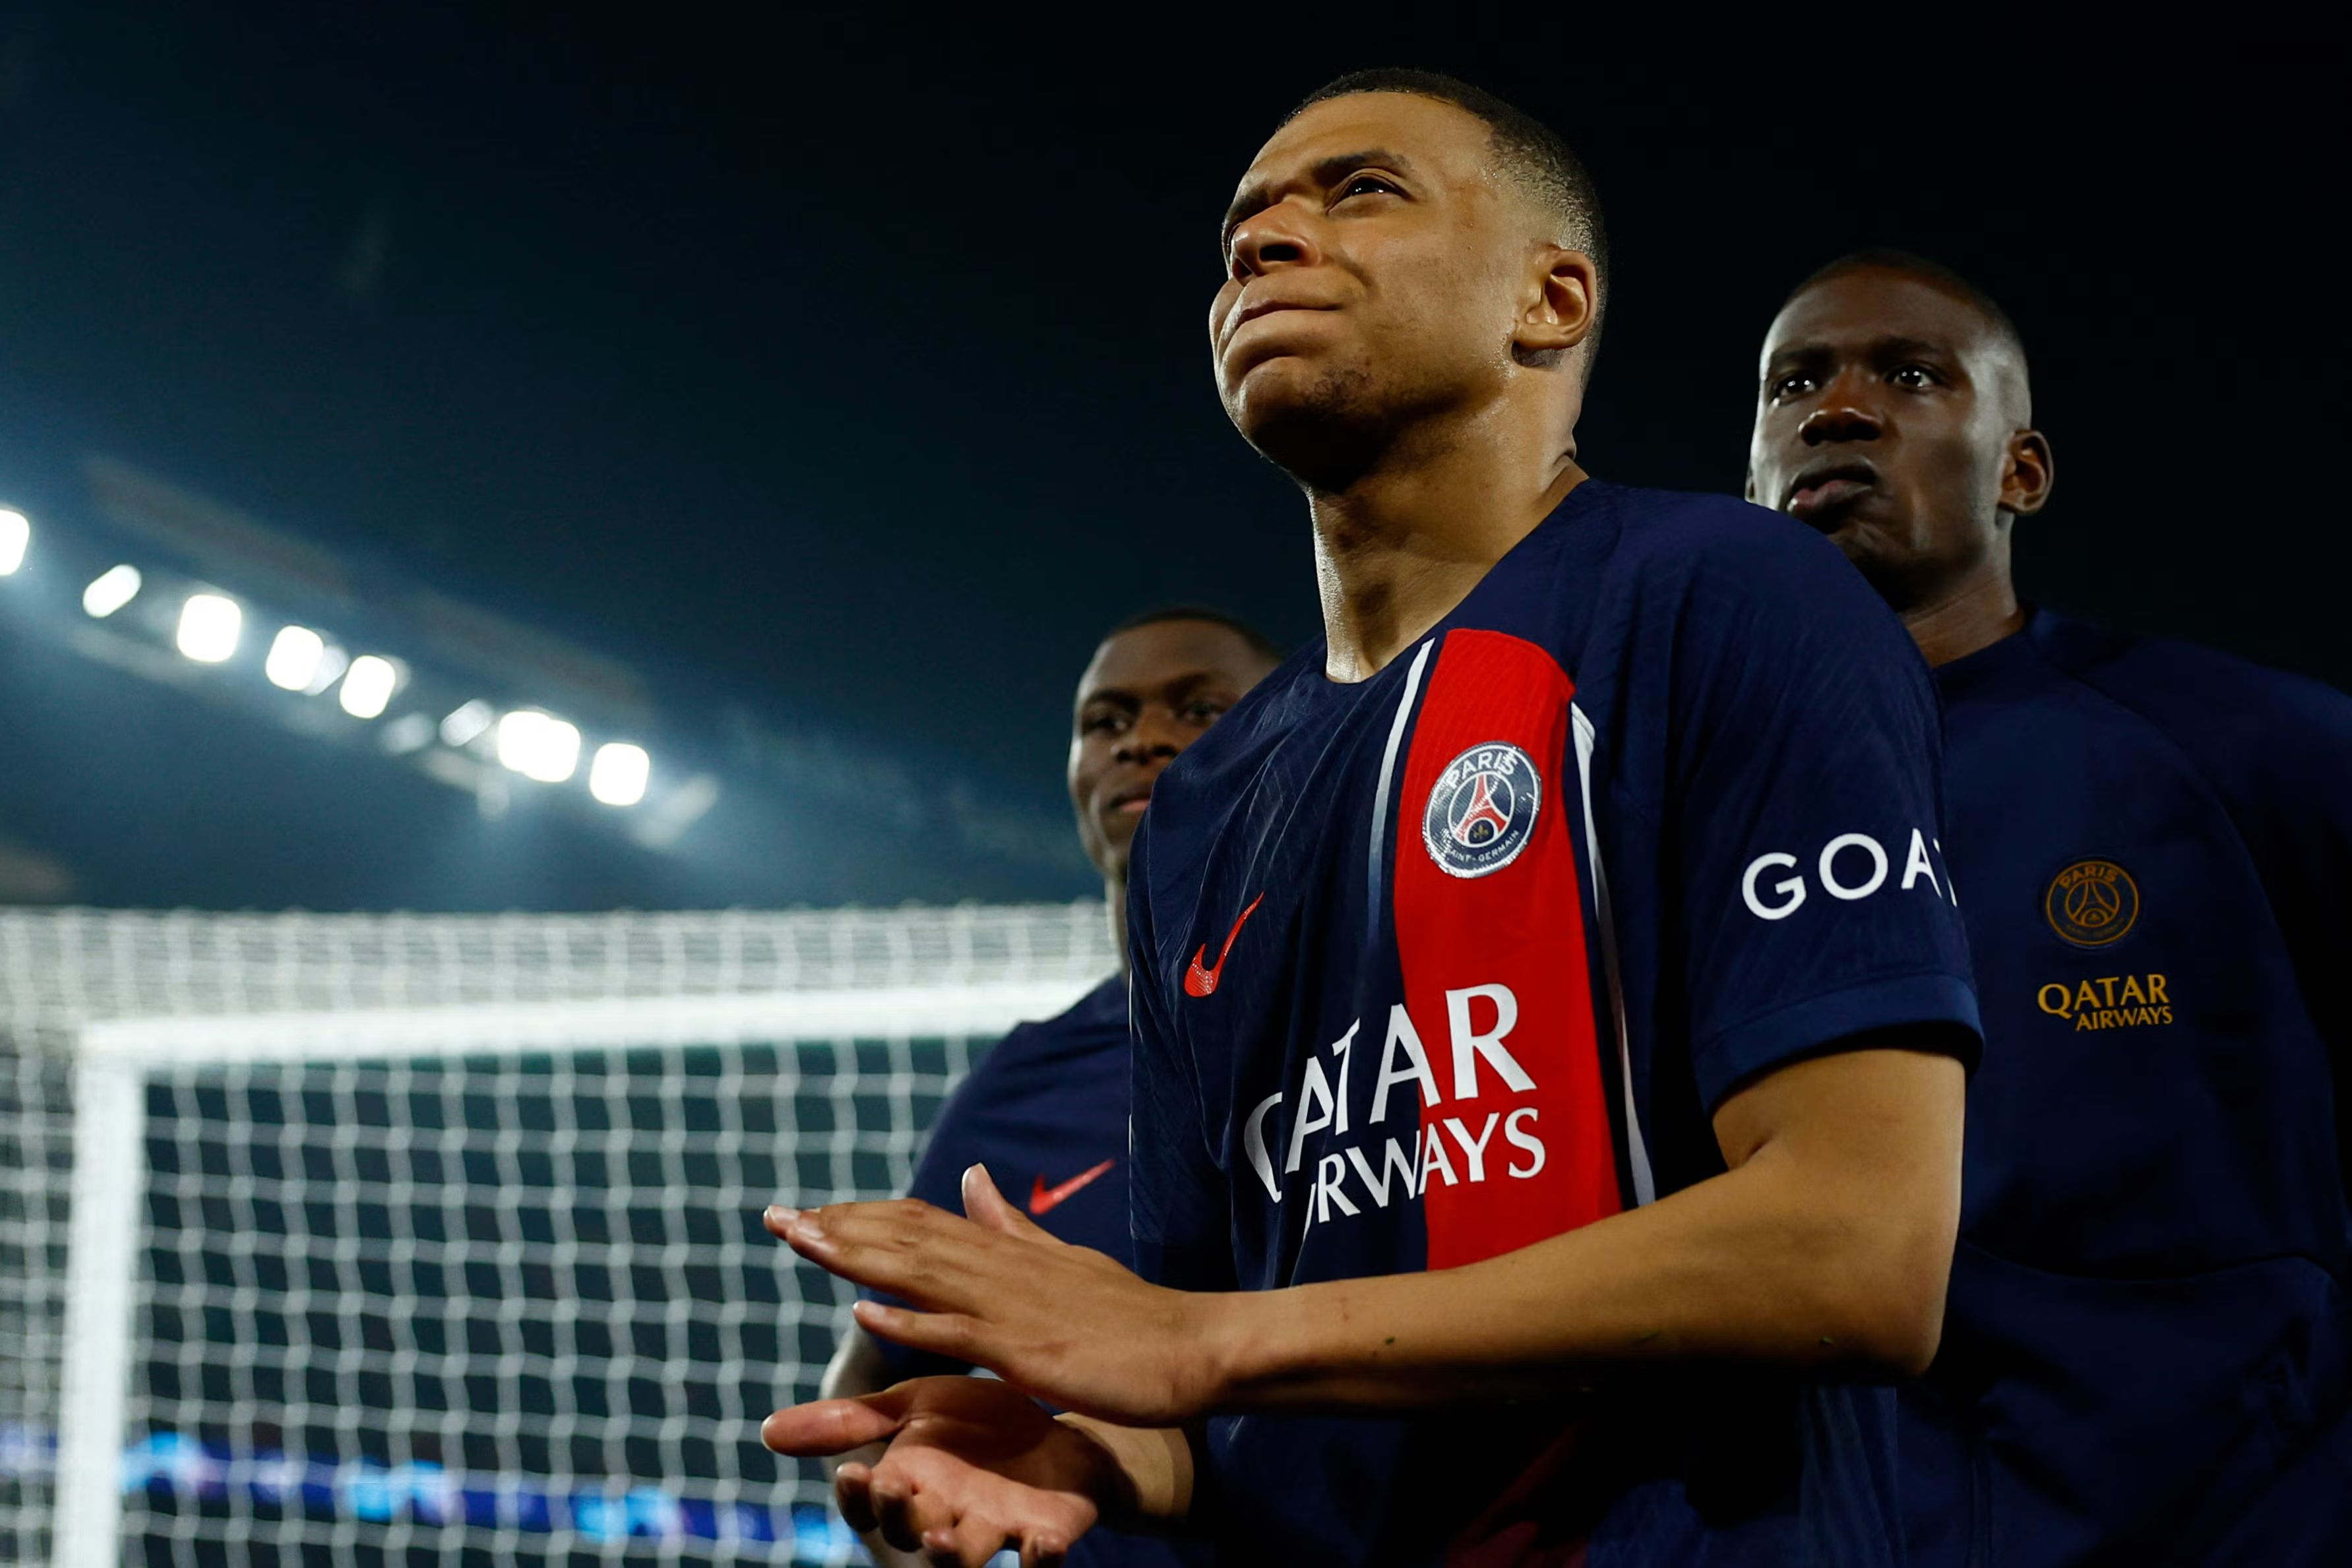 Failure to sign Real Madrid, Barcelona stars contributed to Kylian Mbappe’s PSG exit